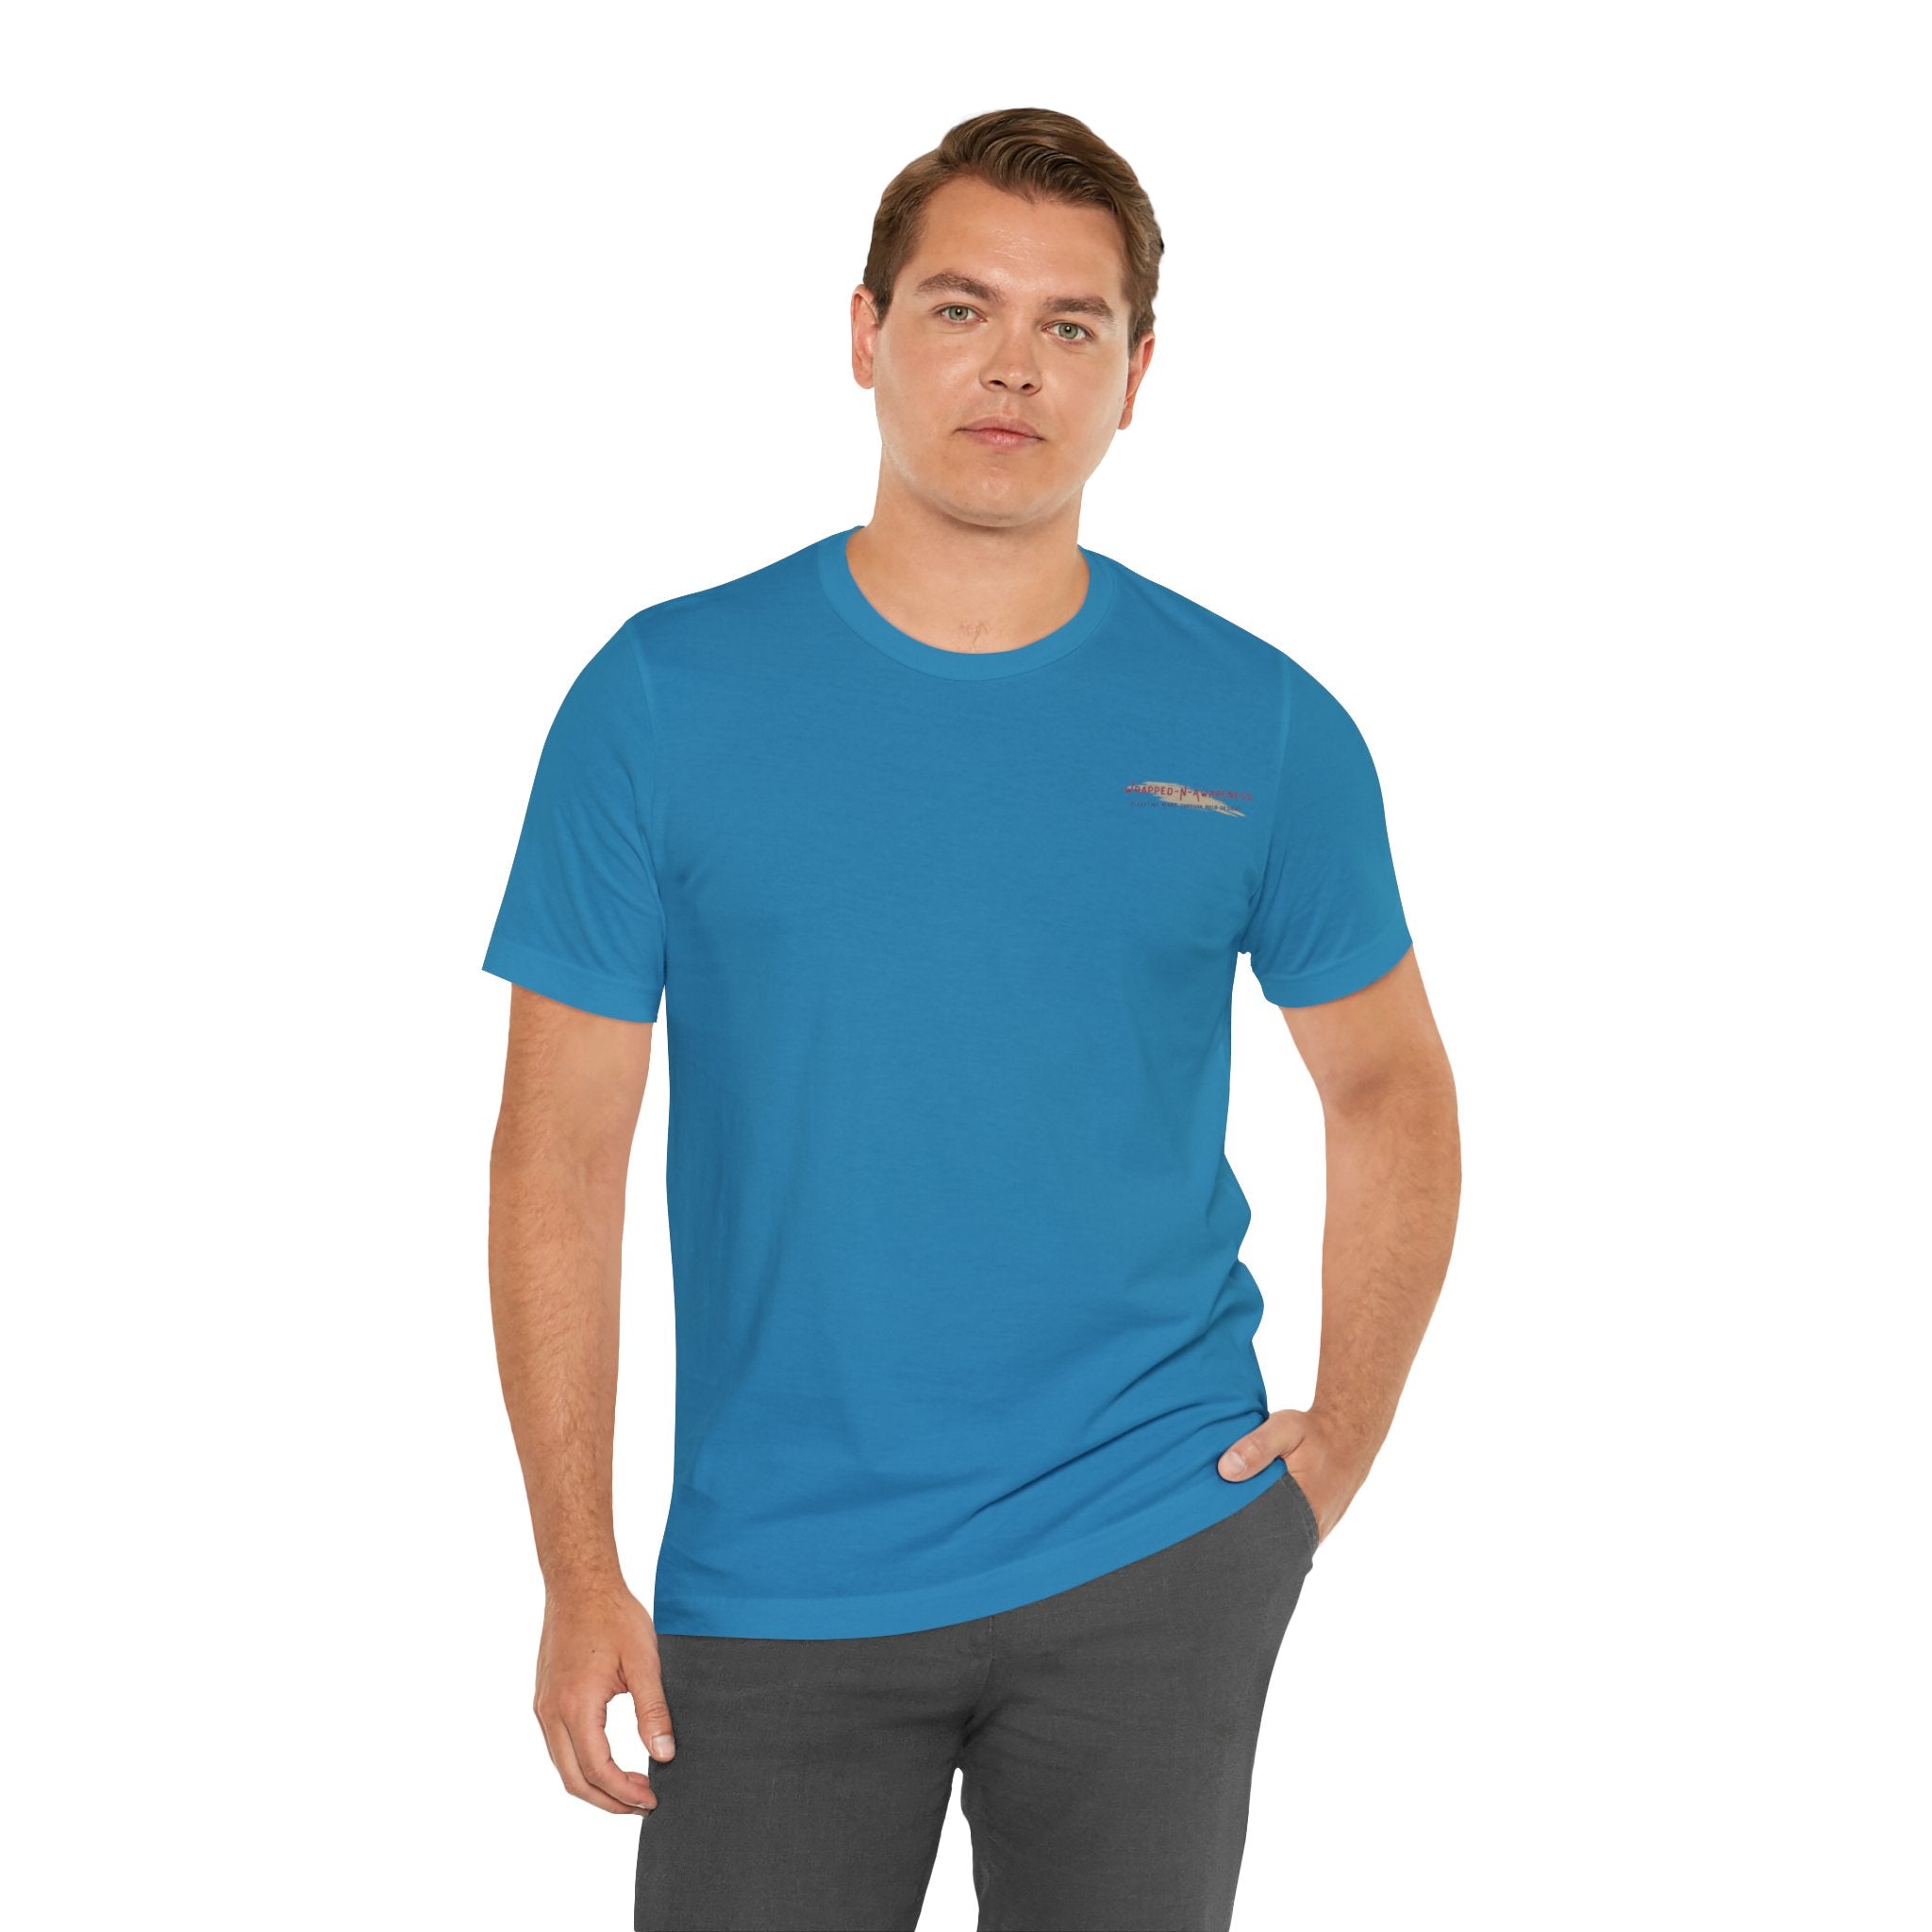 Inspire Growth Jersey Tee - Bella+Canvas 3001 Turquoise Airlume Cotton Bella+Canvas 3001 Crew Neckline Jersey Short Sleeve Lightweight Fabric Mental Health Support Retail Fit Tear-away Label Tee Unisex Tee T-Shirt 10751919116677239327_2048 Printify